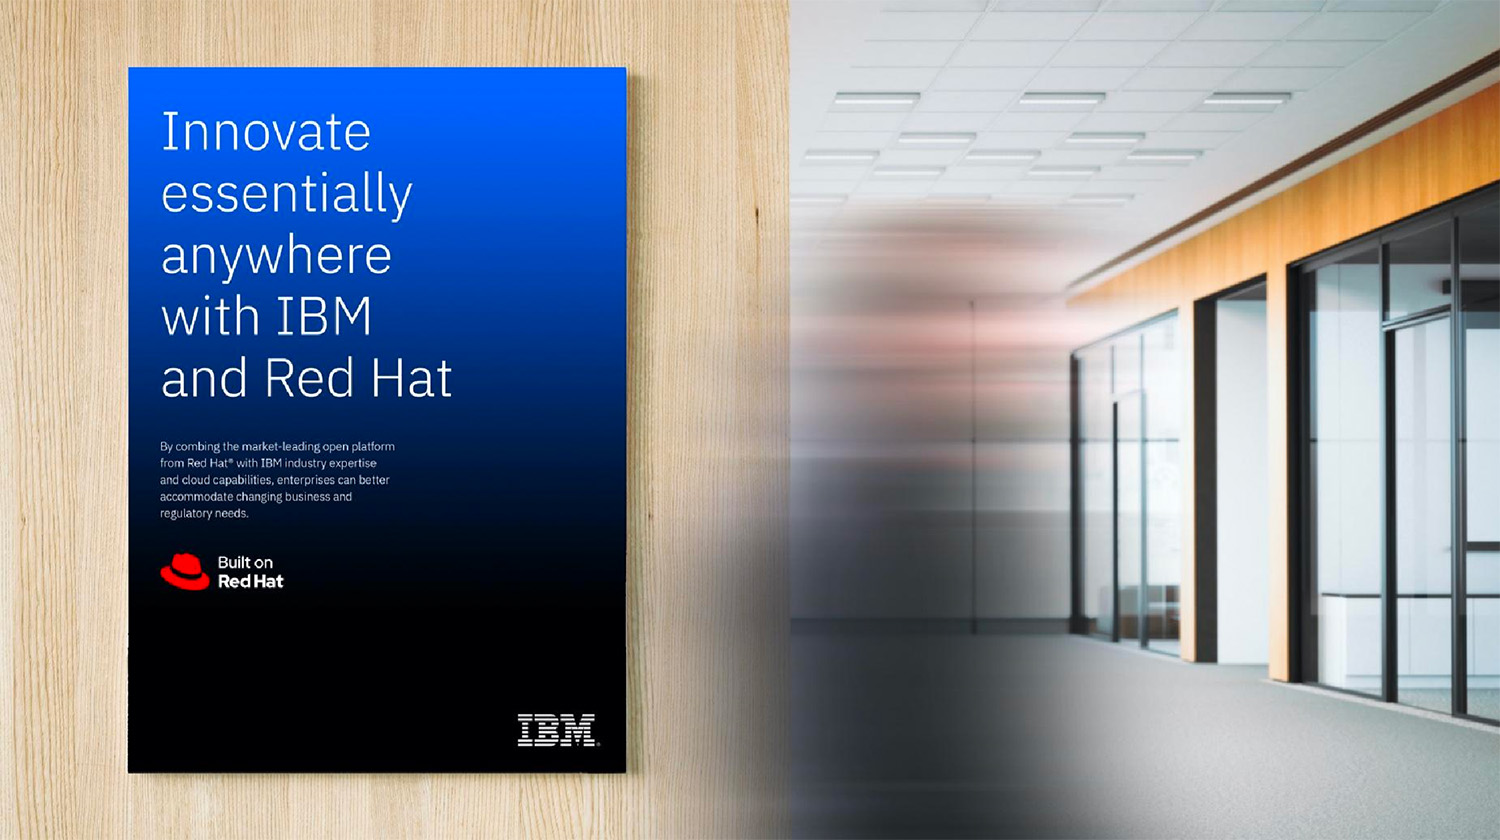 Poster at an IBM booth with IBM branding and a “Built on Red Hat” endorsement logo.